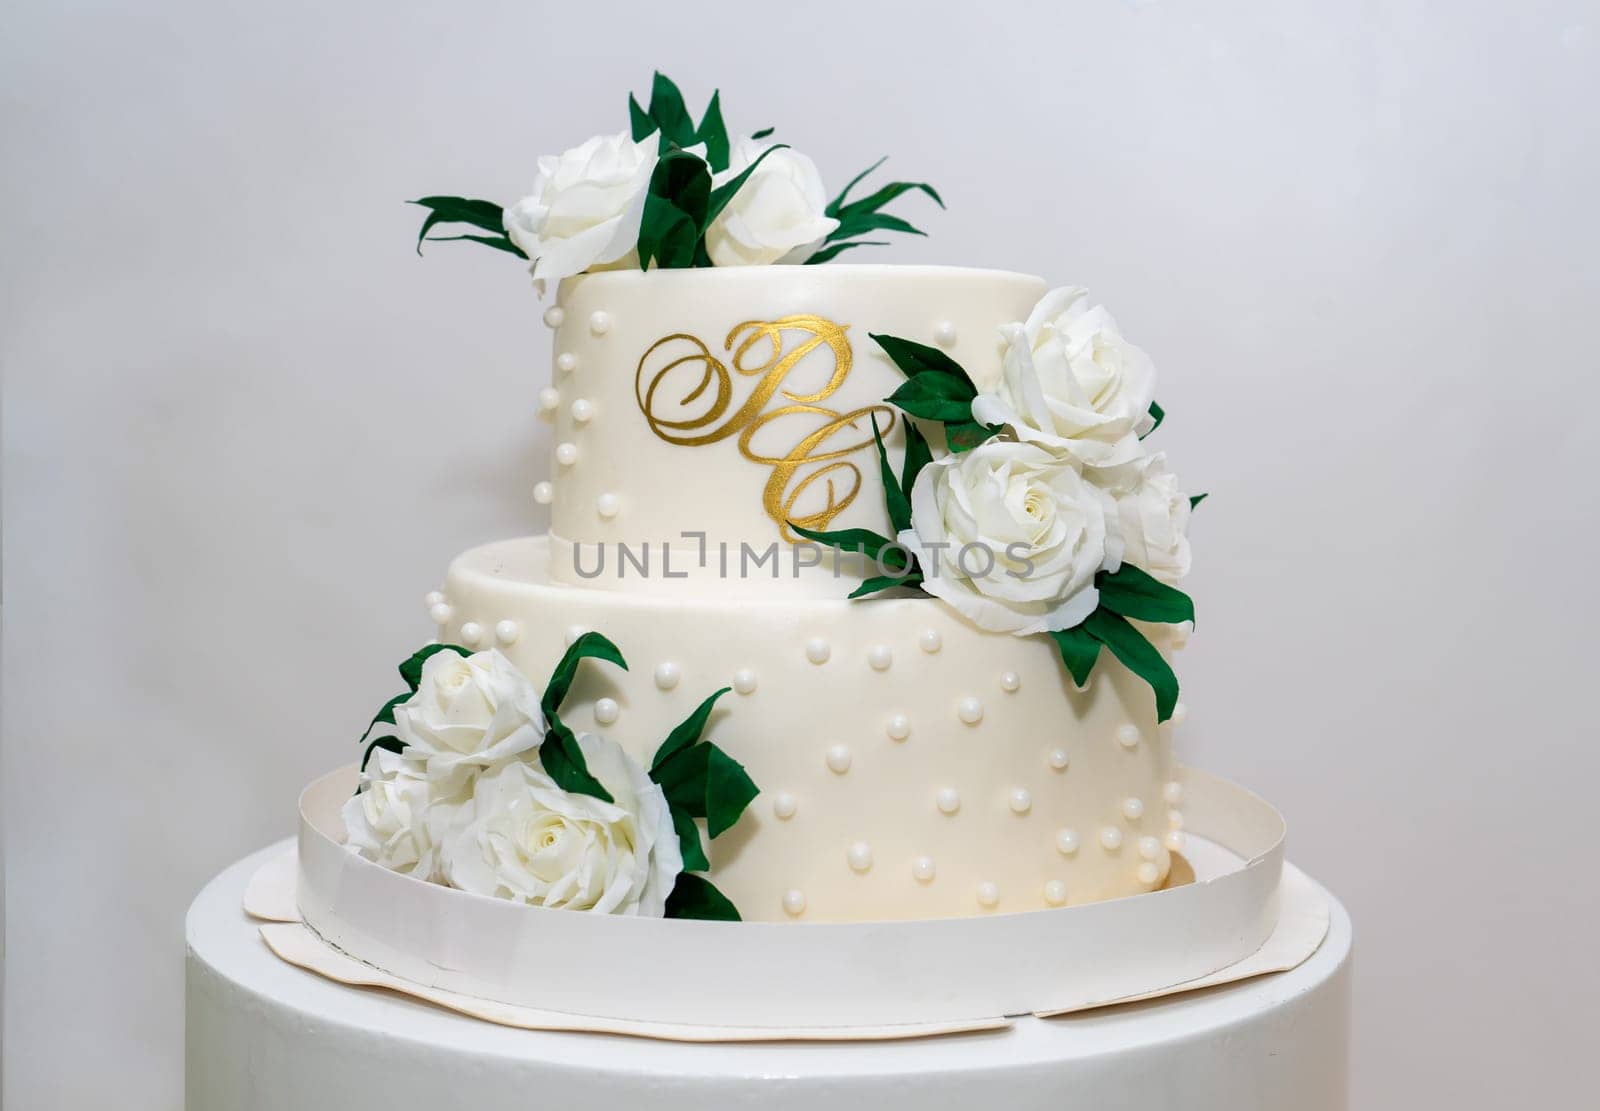 Two-tiered white wedding cake decorated with white roses by Serhii_Voroshchuk